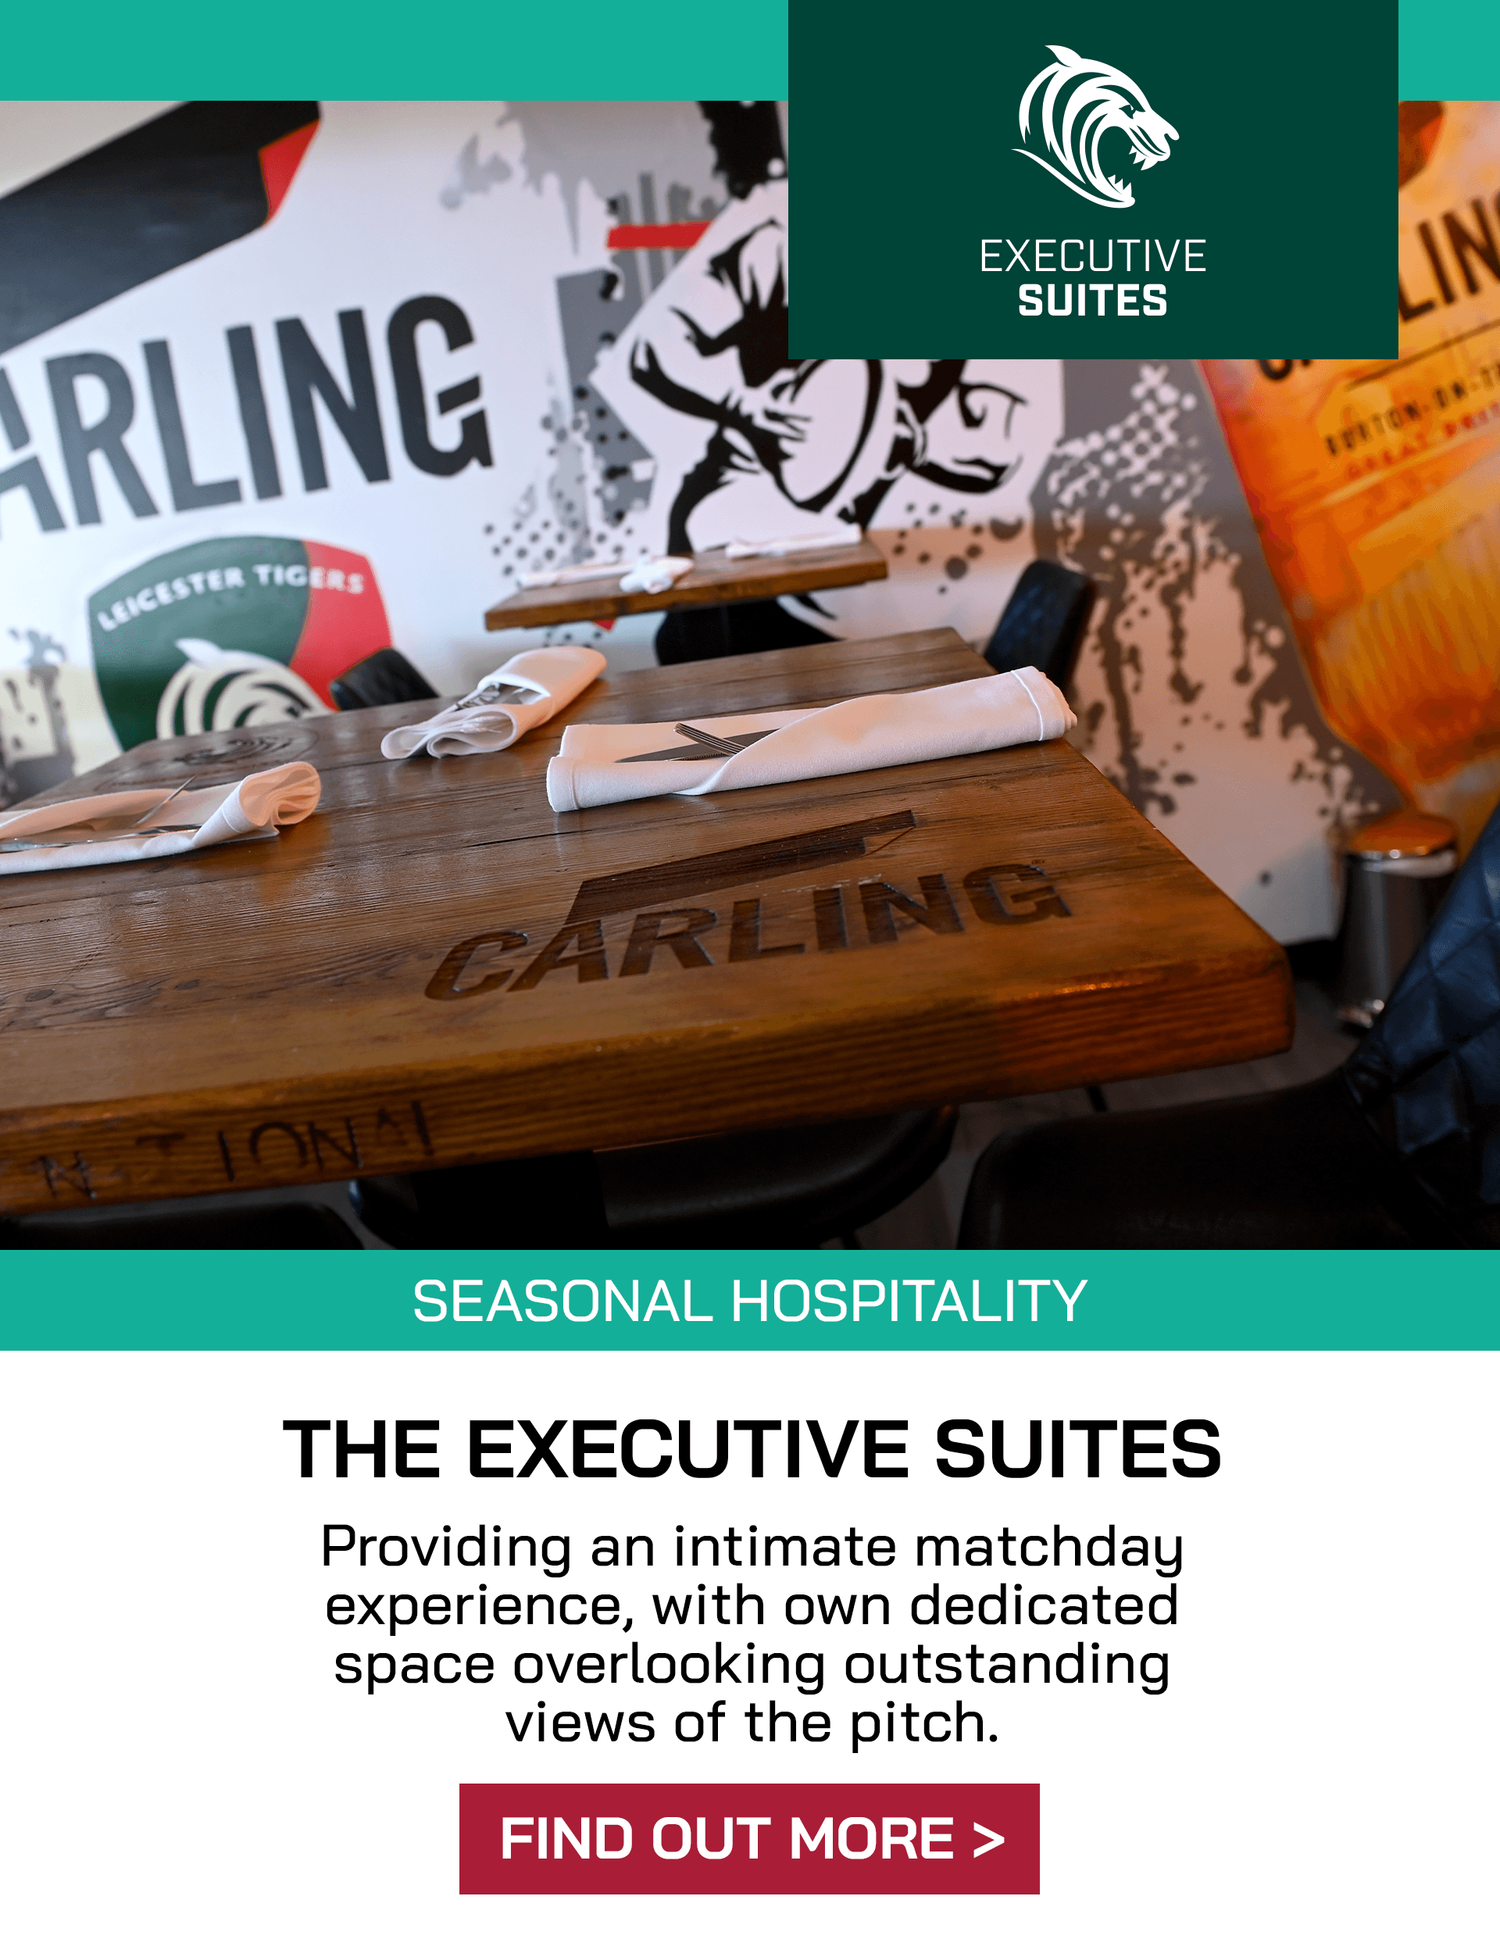 Leicester Tigers Hospitality - Executive Suites